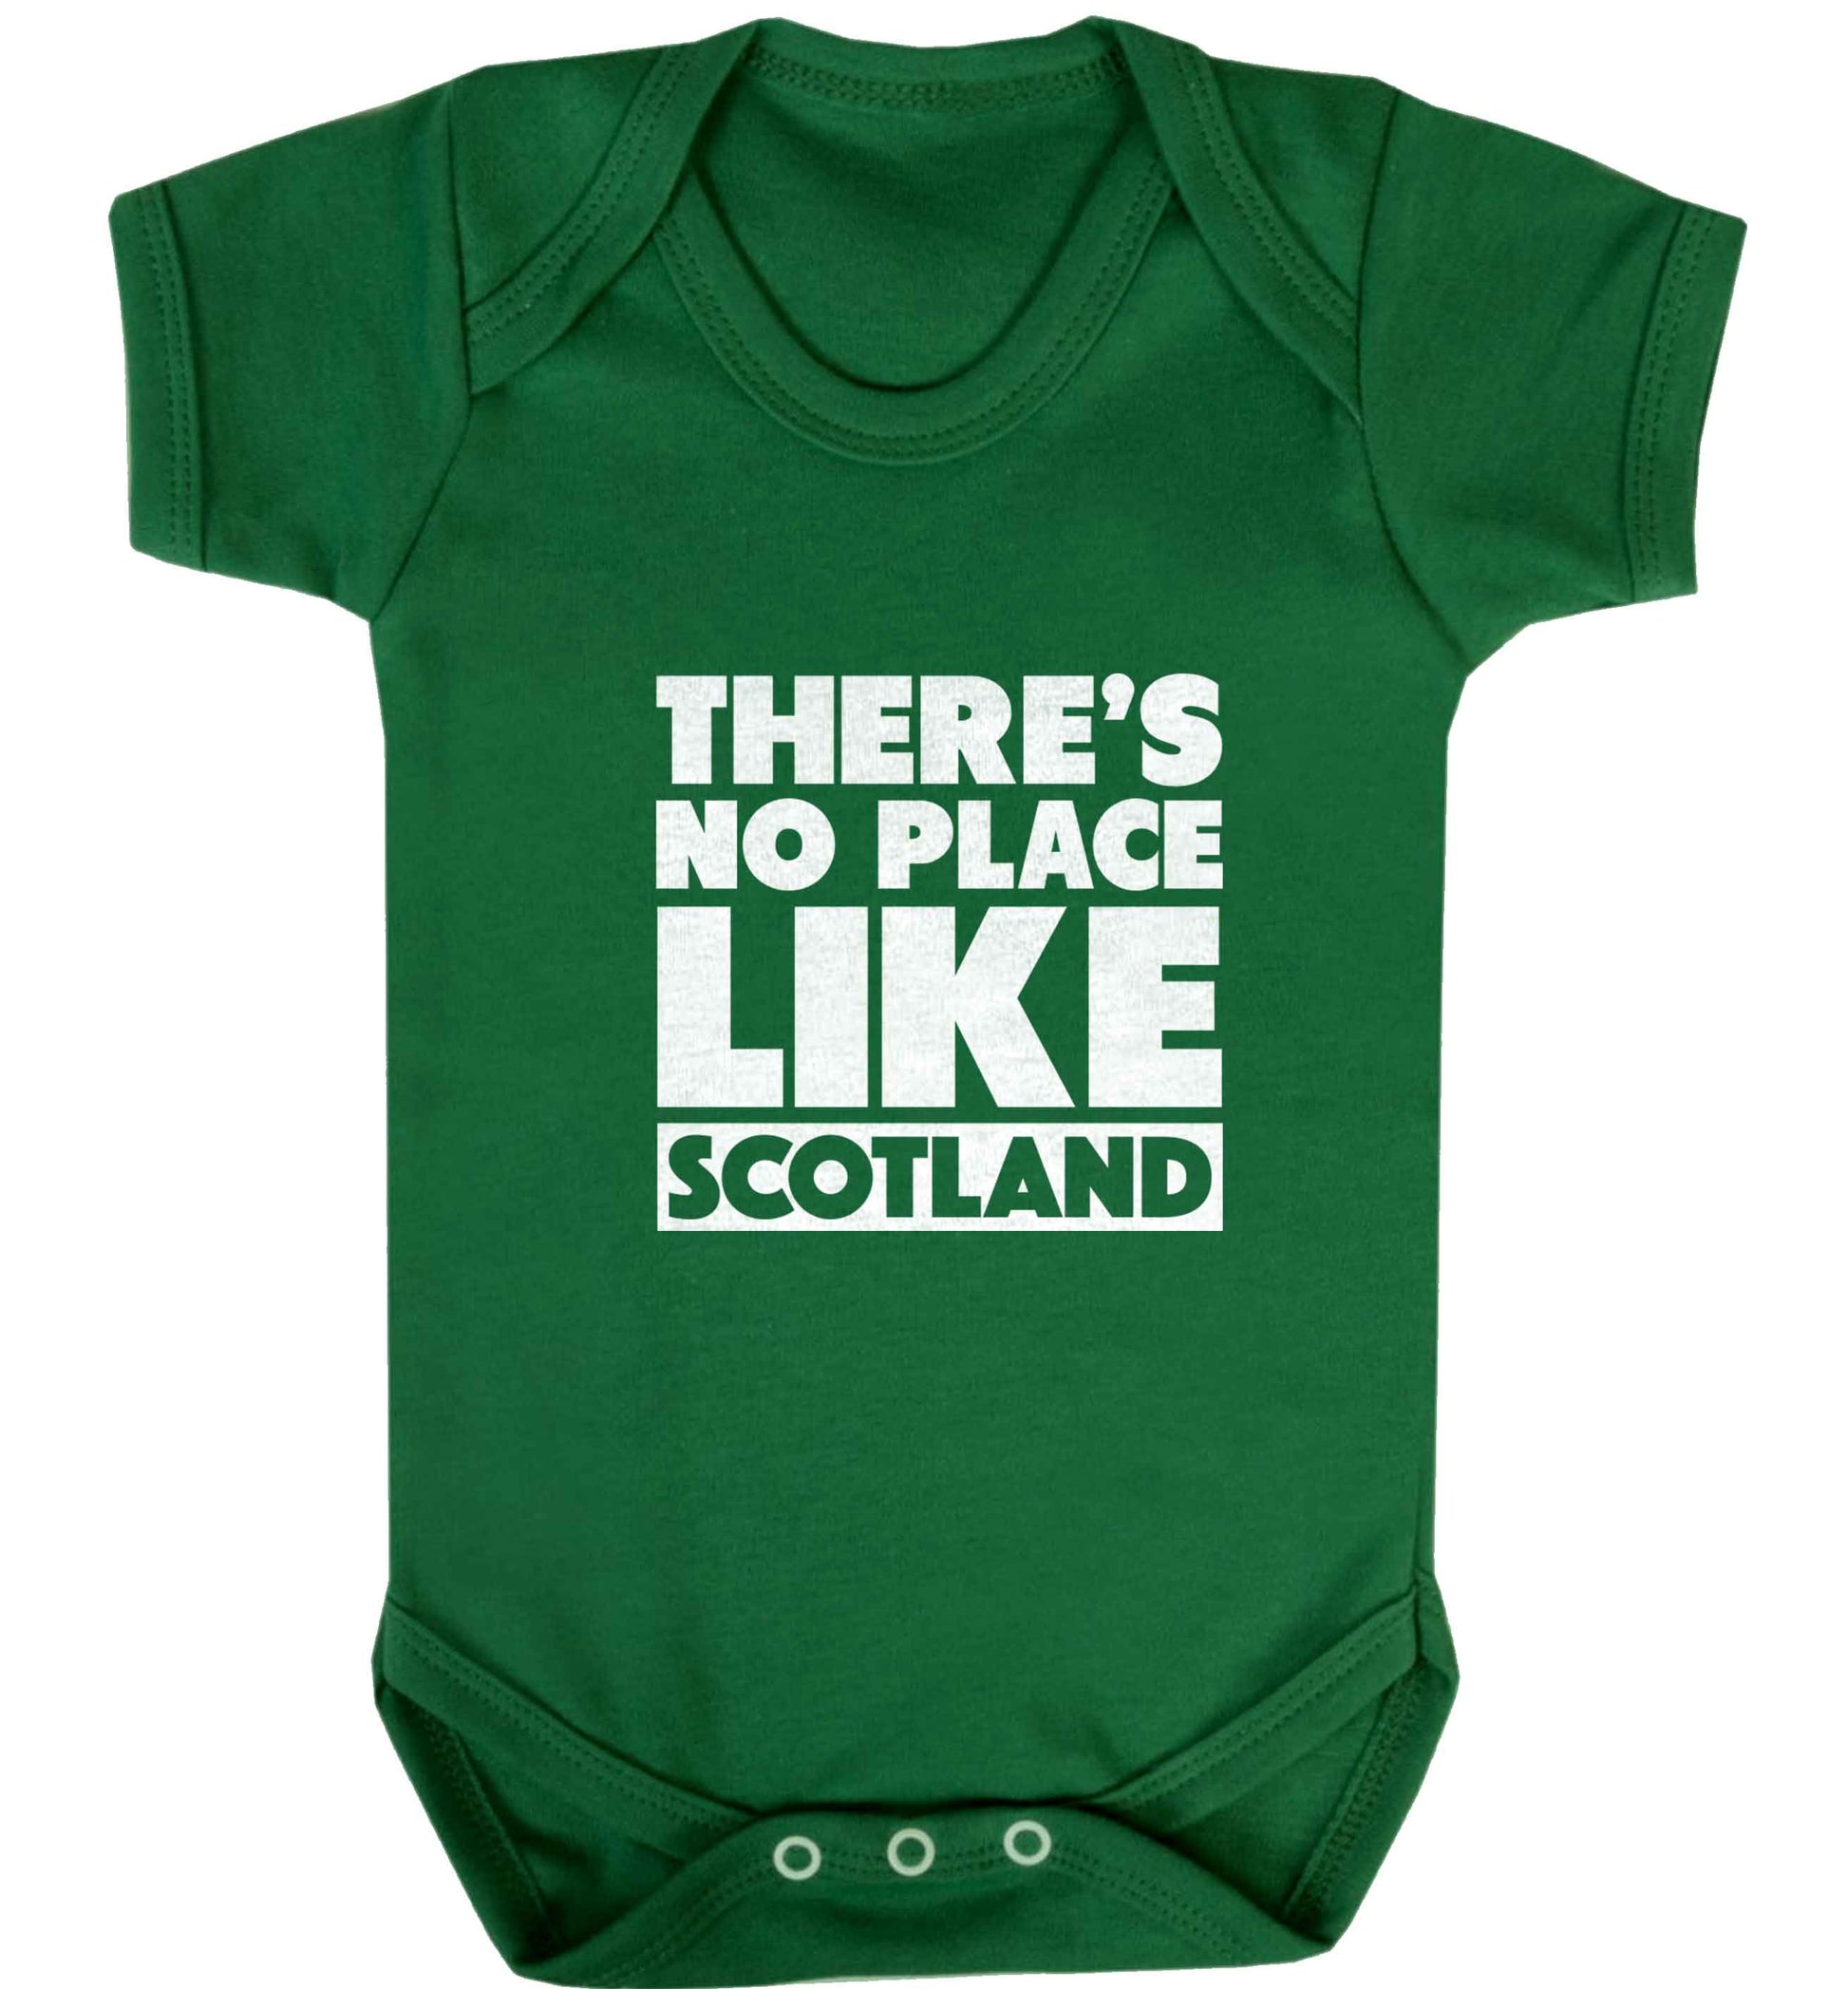 There's no place like Scotland baby vest green 18-24 months